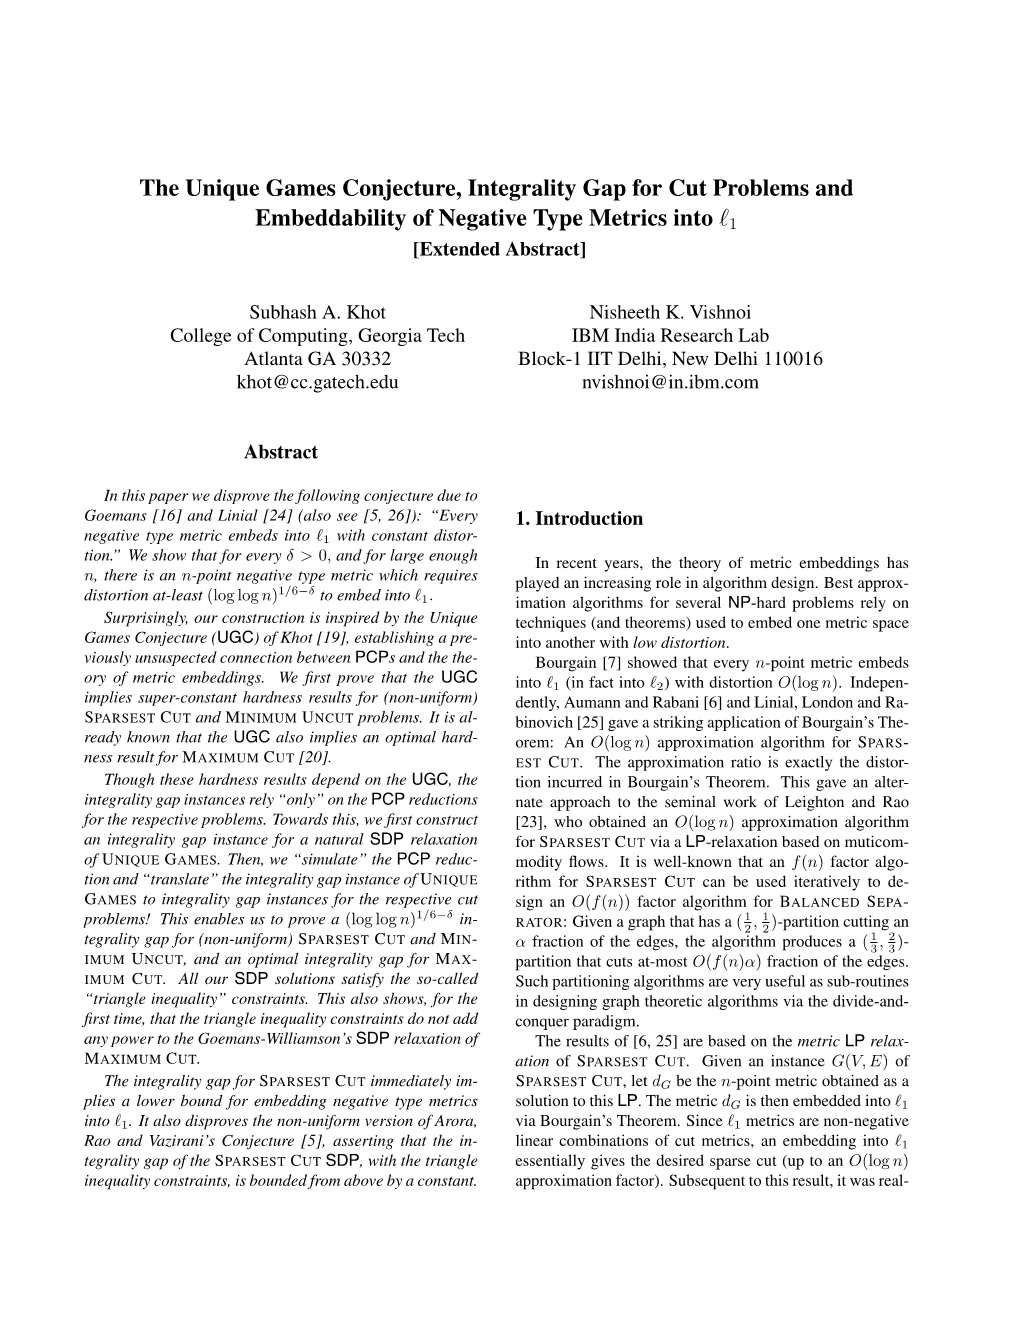 The Unique Games Conjecture, Integrality Gap for Cut Problems and Embeddability of Negative Type Metrics Into �1 [Extended Abstract]